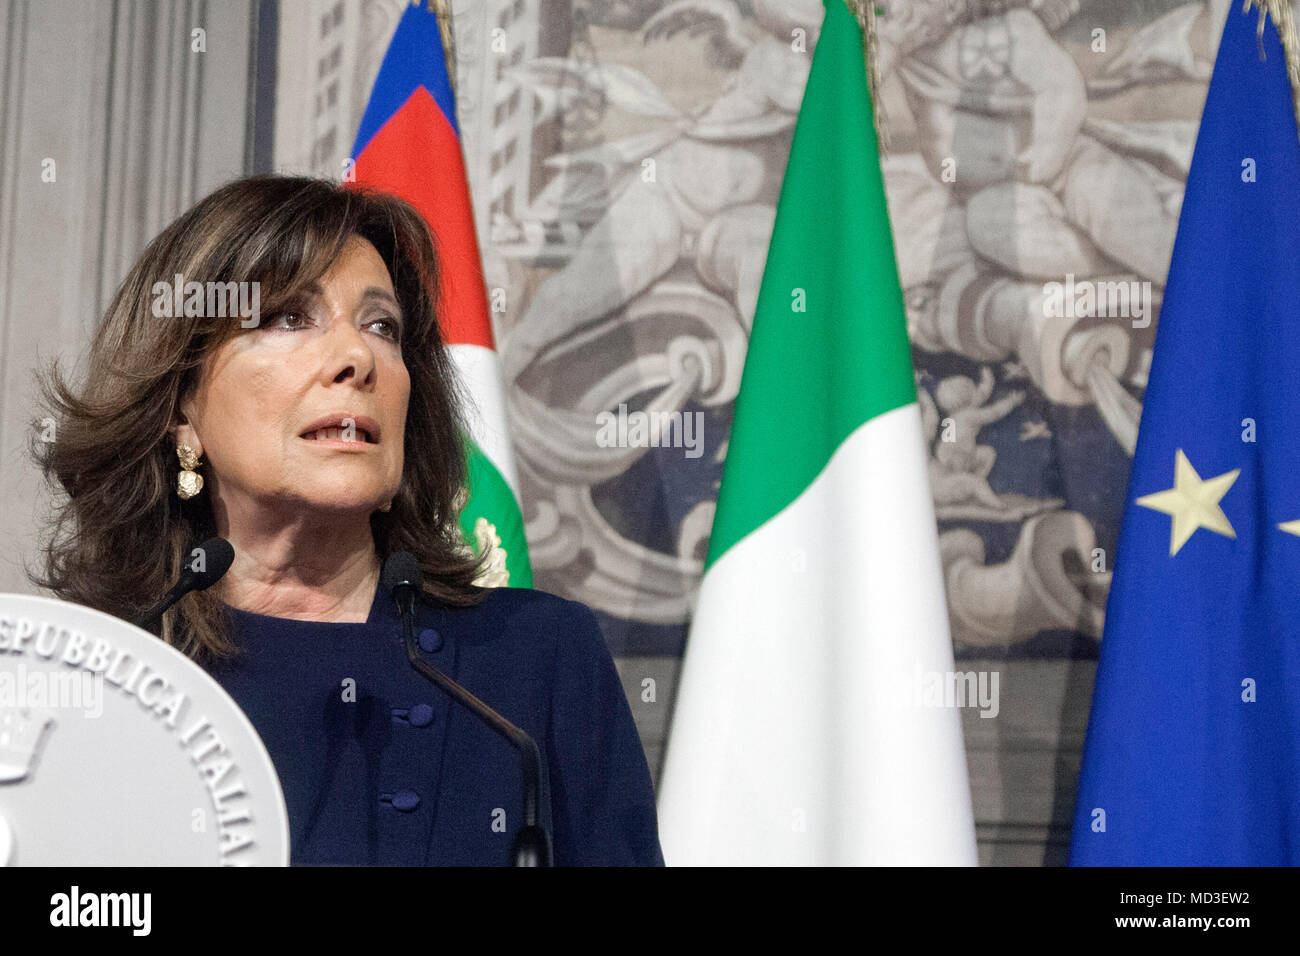 Rome, Italy. 18th April 2018. Italy Names Senate speaker Maria Elisabetta  Alberti Casellati as mediator to break political impasse during a news conference following her meeting with Italy's President Sergio Mattarella at the Quirinale Credit: Sara De Marco/Alamy Live News Stock Photo